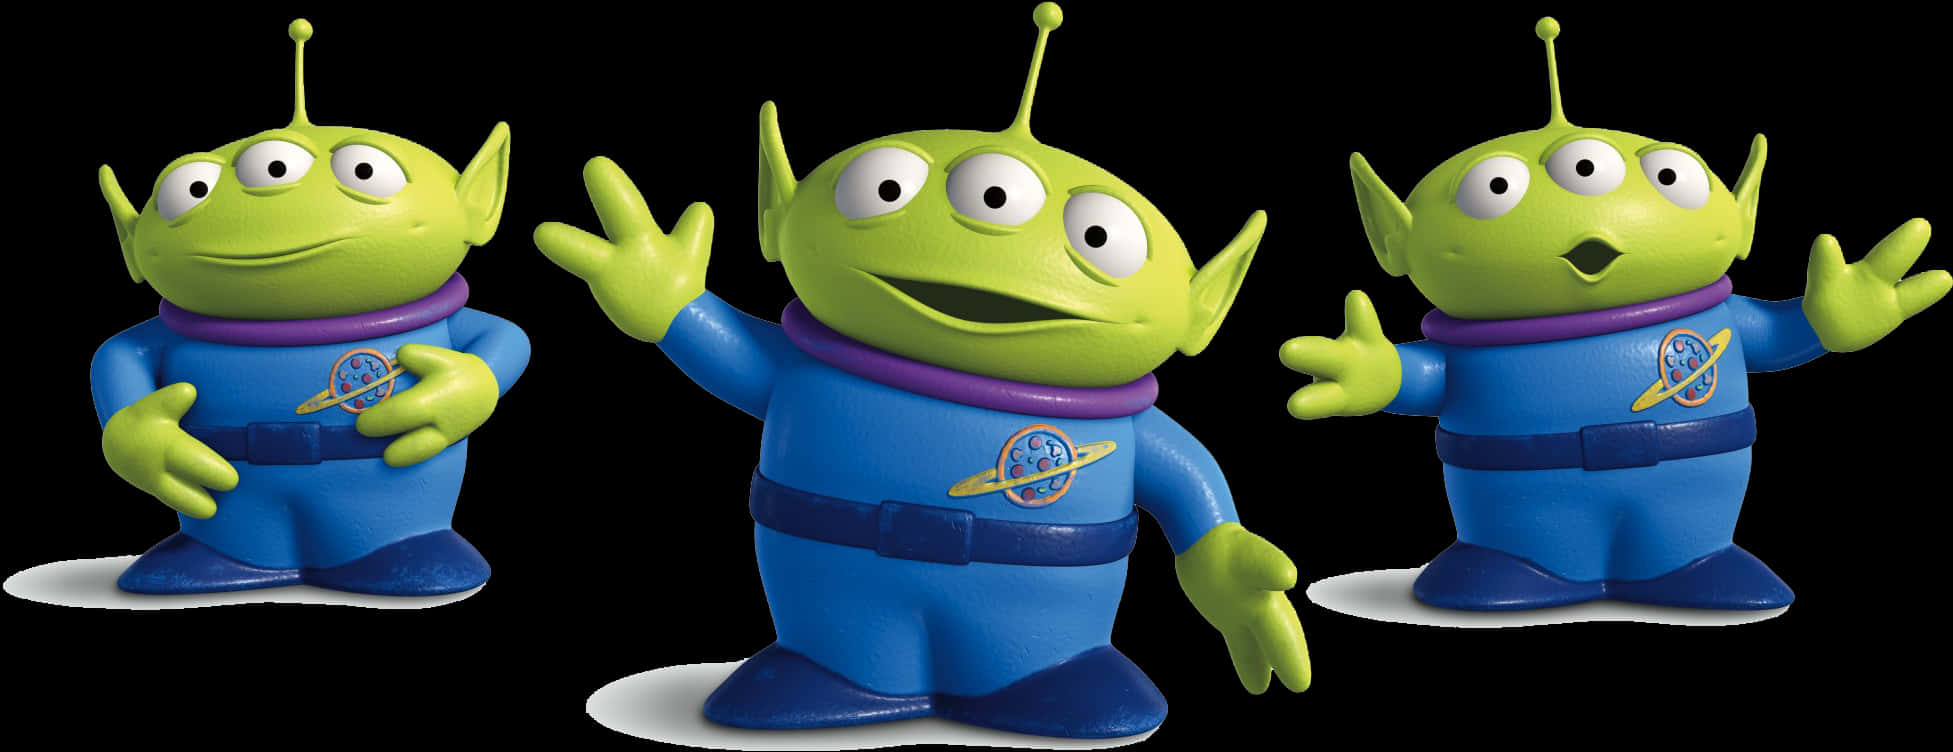 A Green Alien With Blue Body And Purple Collar PNG